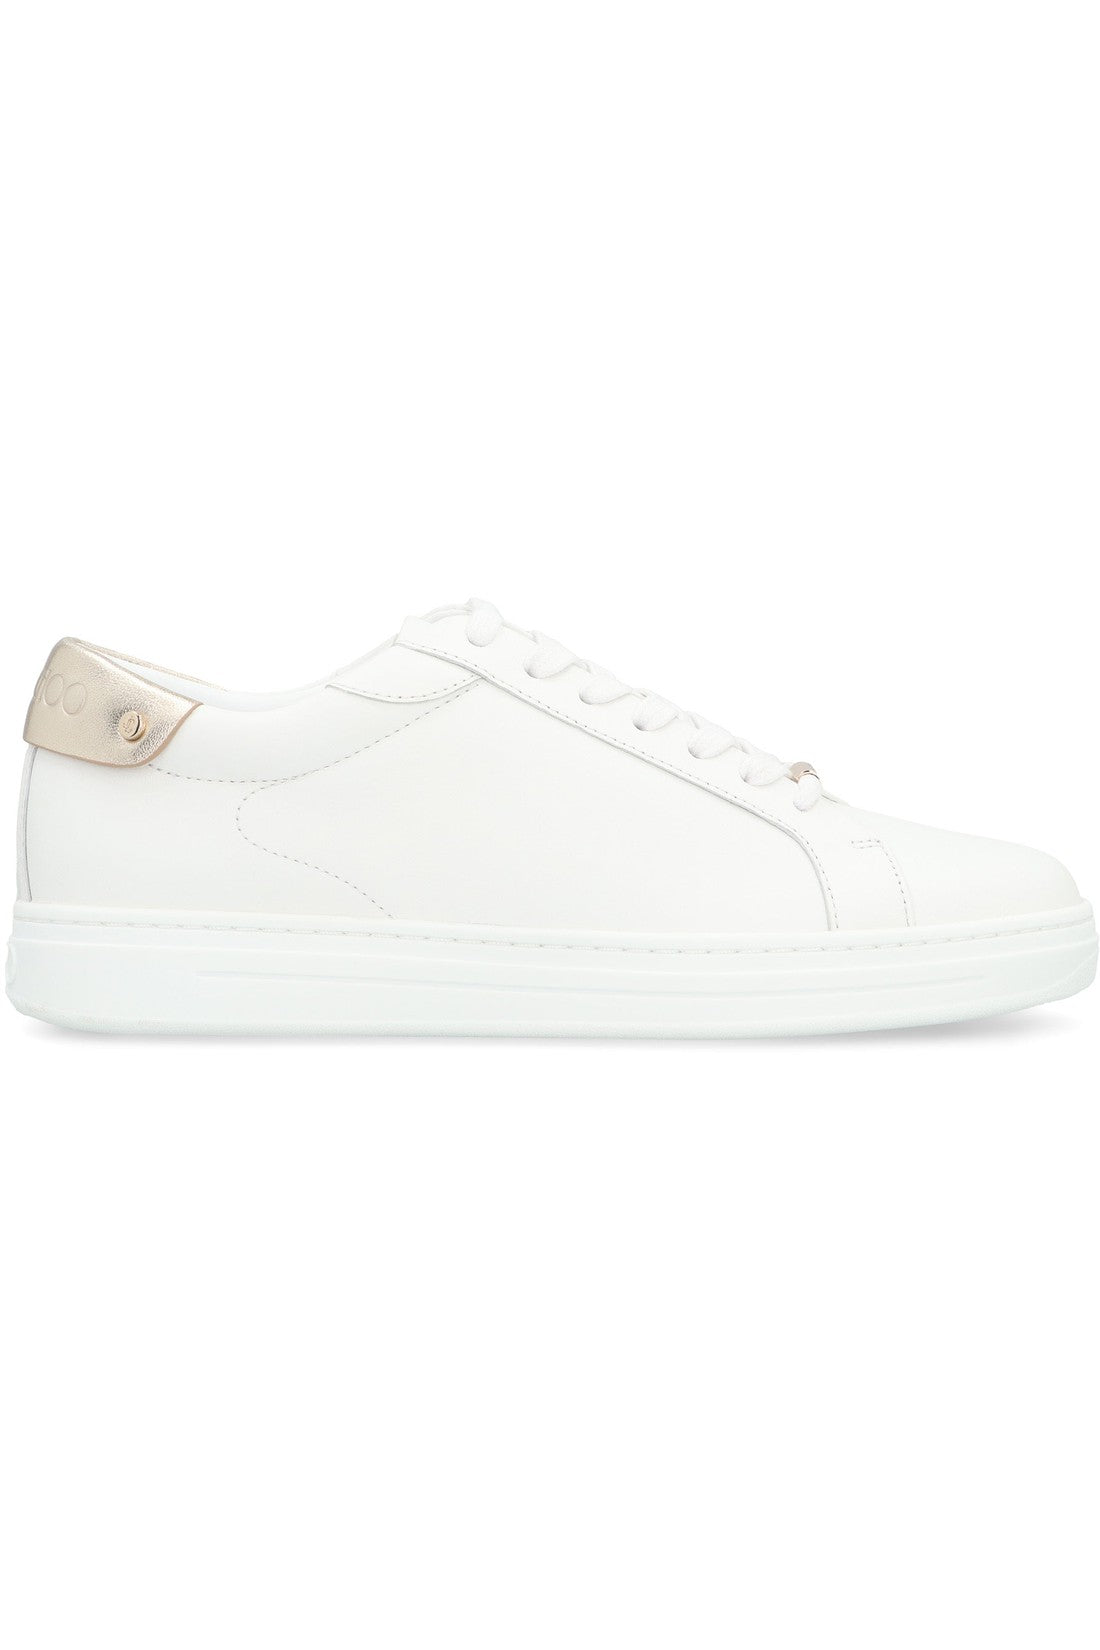 F leather sneakers-ARCHIVIST